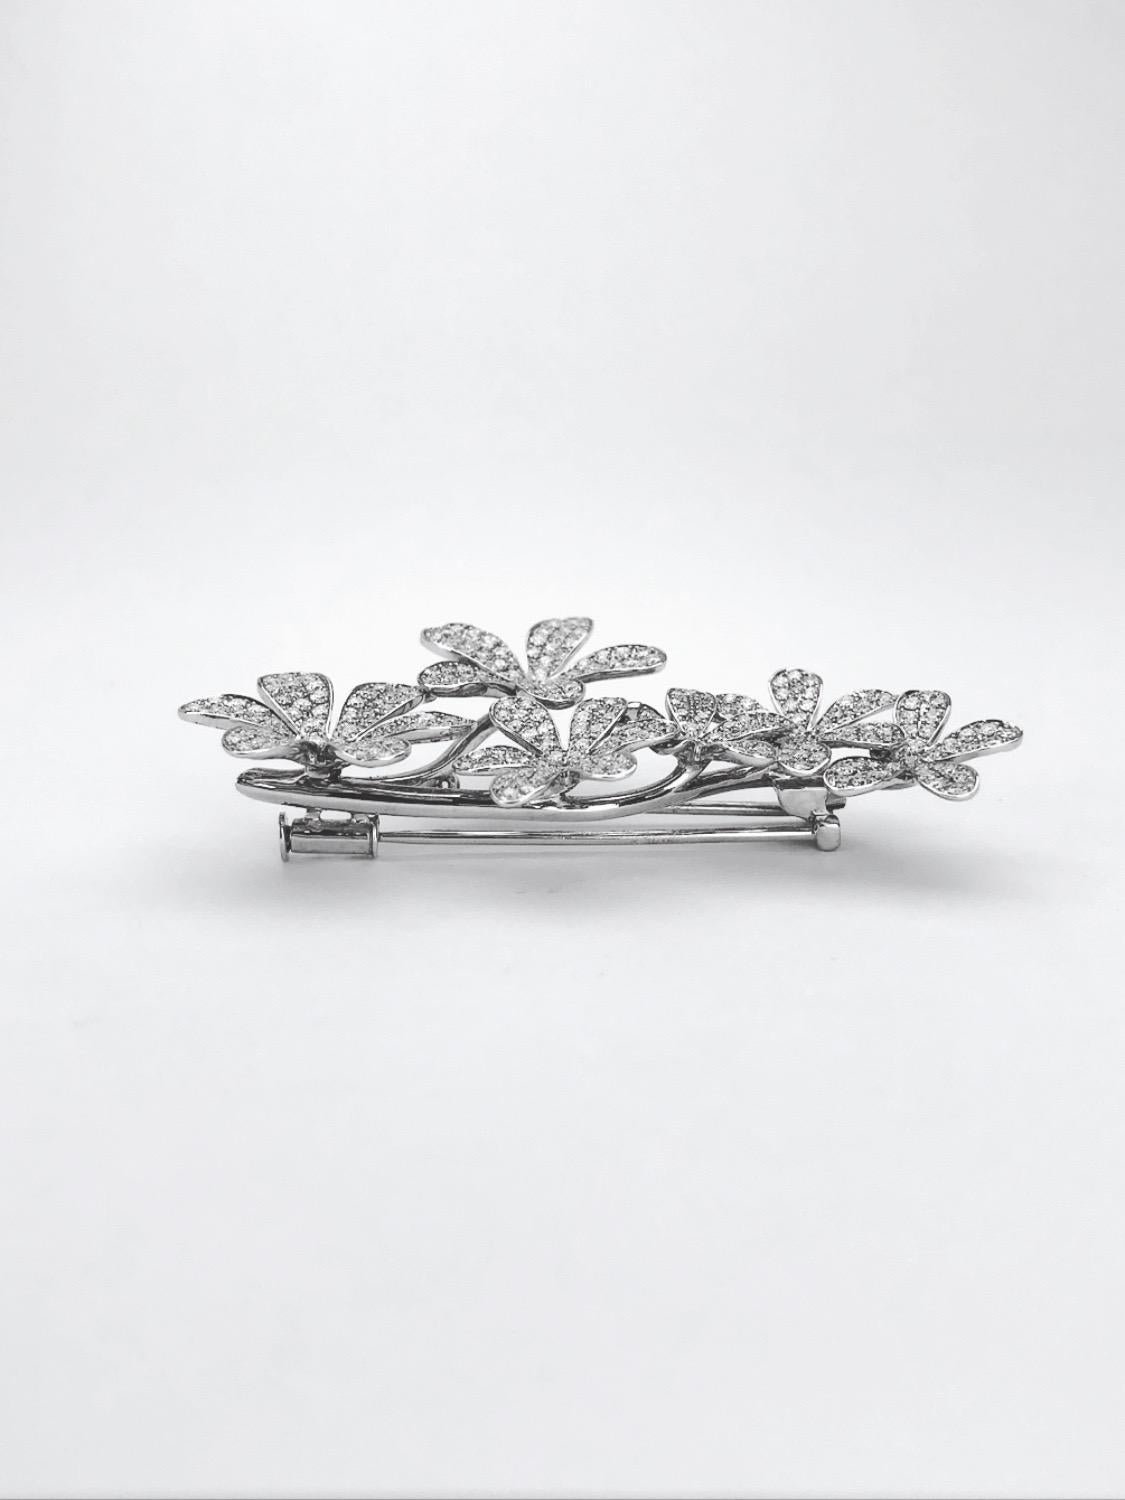 Stenzhorn 18 Karat White Gold Brooch with Six 3.20 Carat Diamond Flowers In New Condition For Sale In New York, NY